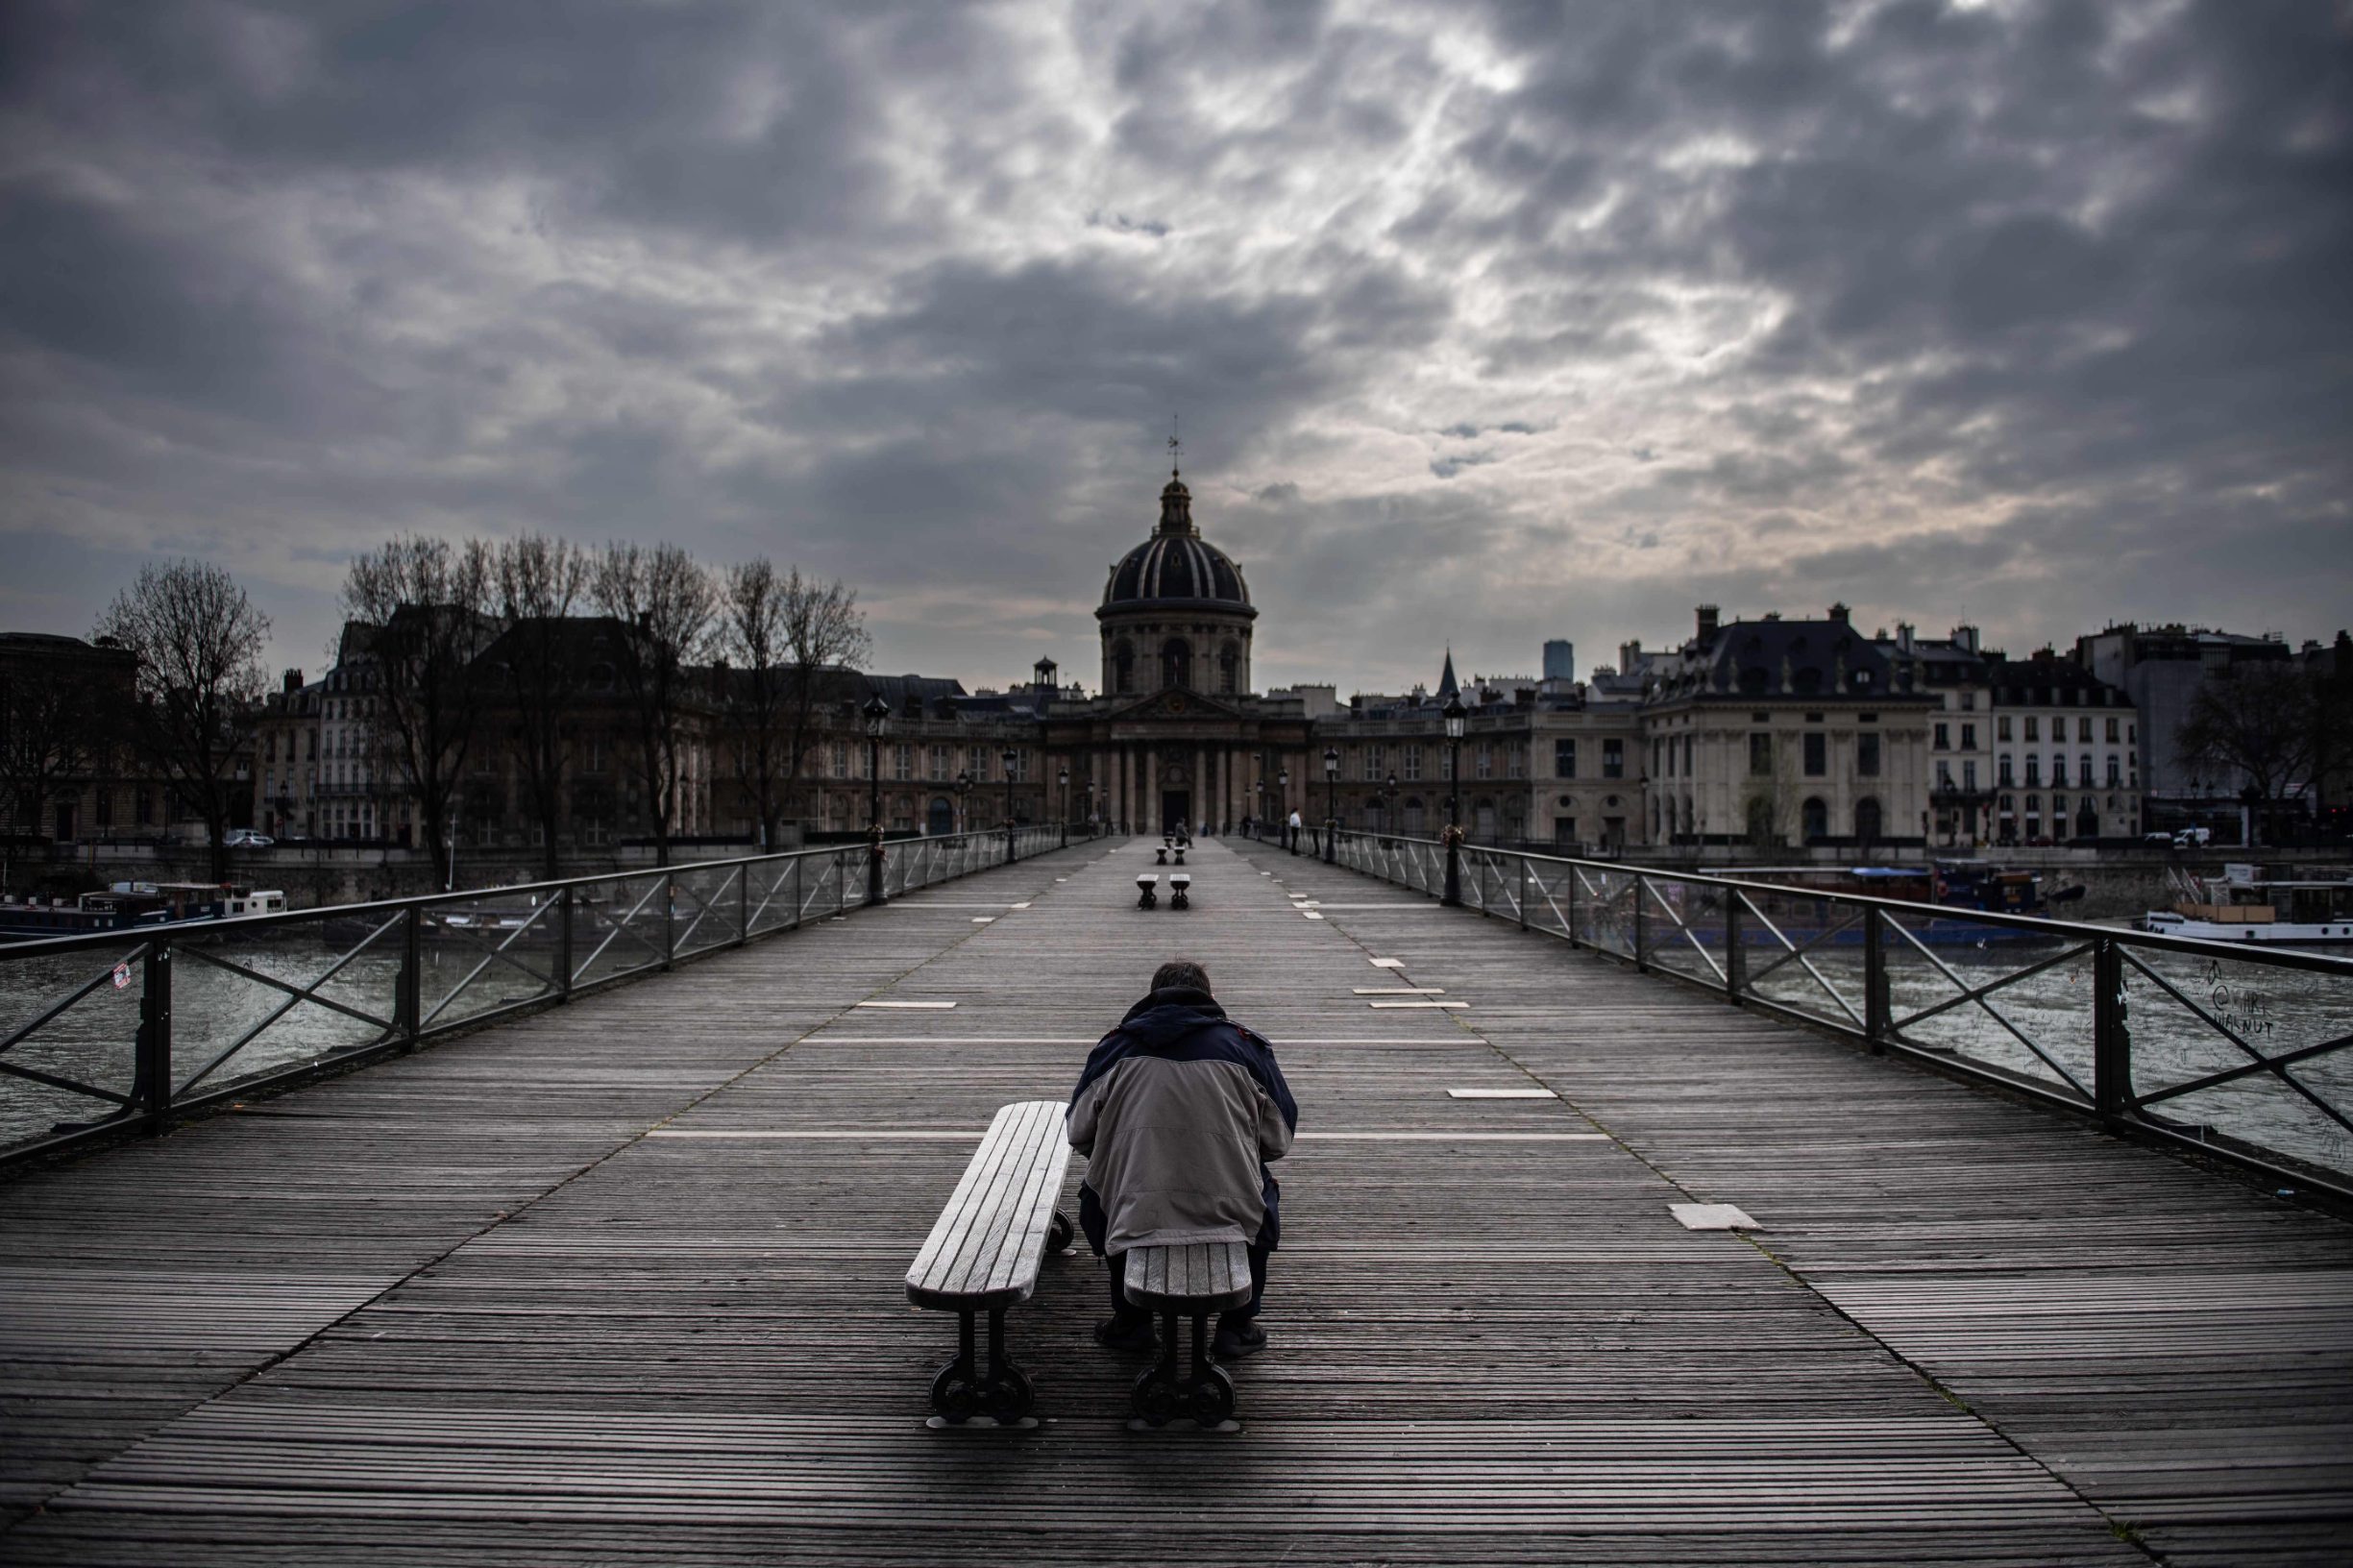 A man waits on a bench of the Pont Des Arts in Paris on March 17, 2020 as a strick lockdown comes into in effect to stop the spreading of the COVID-19 in the country. - French President asked people to stay at home to avoid the spreading the Covid-19, saying only necessary trips would be allowed and violations would be punished. The country has already shut cafes, restaurants, schools and universities and urged people to limit their movements. (Photo by Martin BUREAU / AFP)